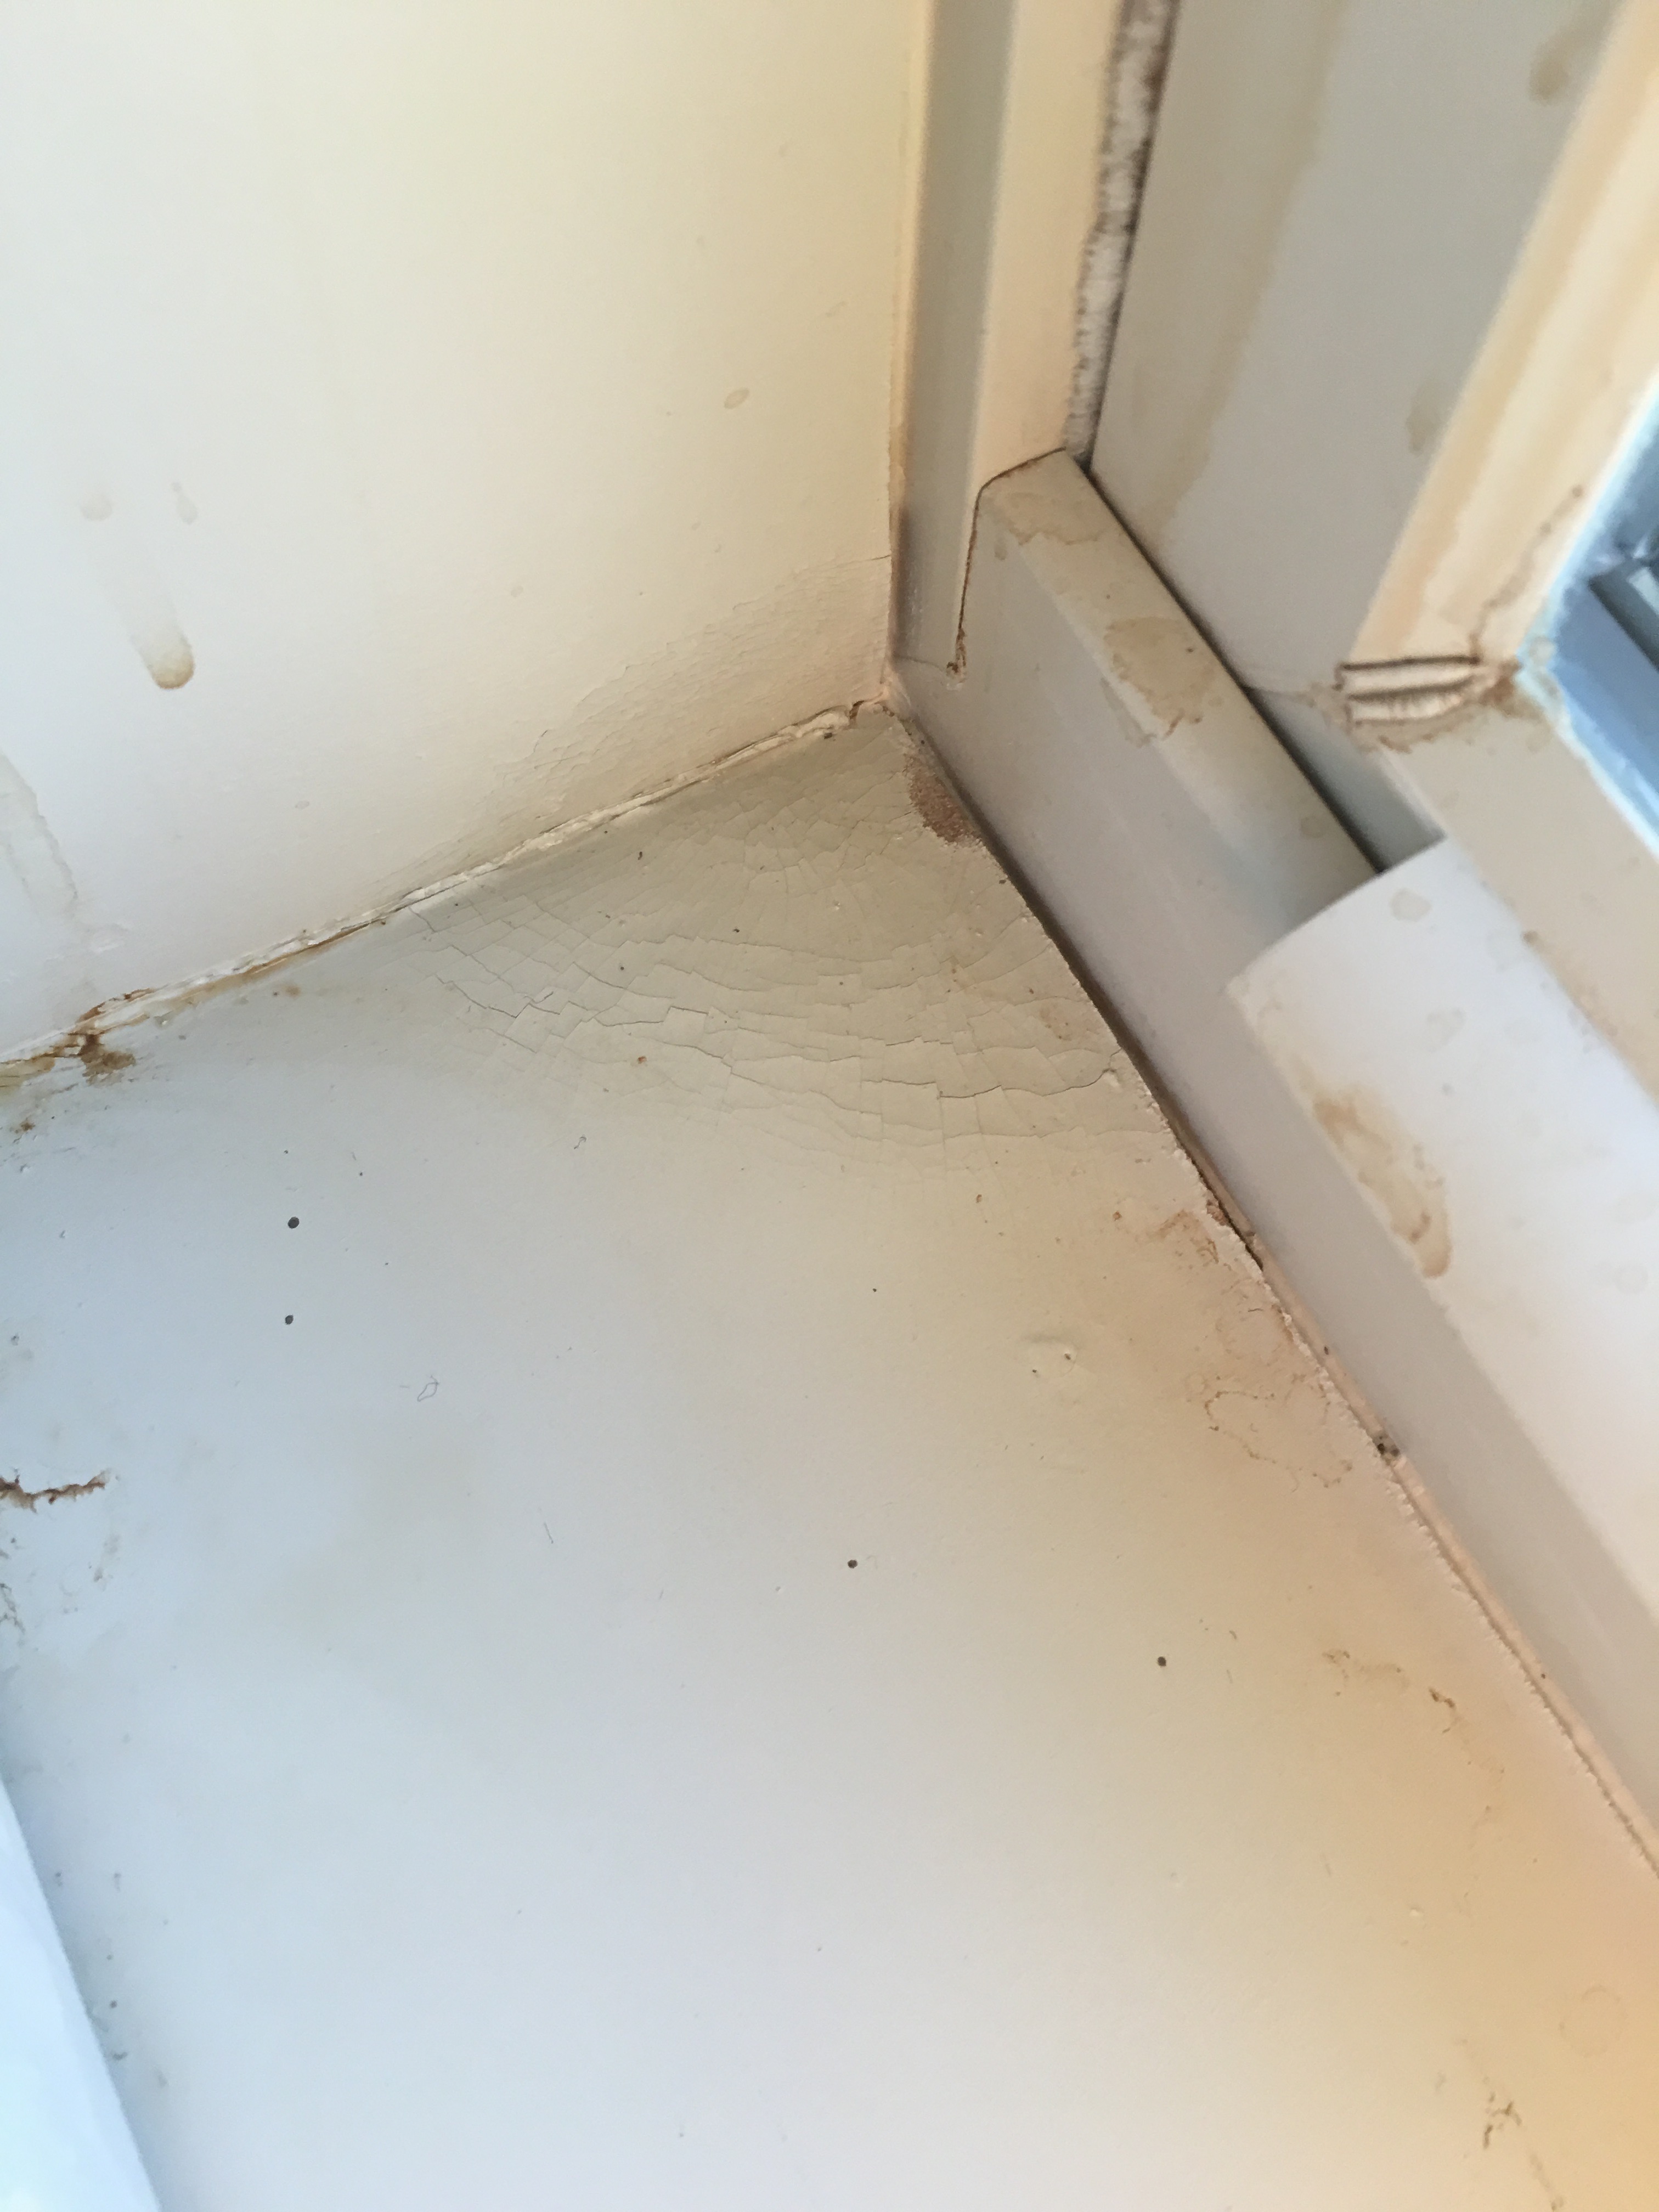 swelling from water intrusion into walls 